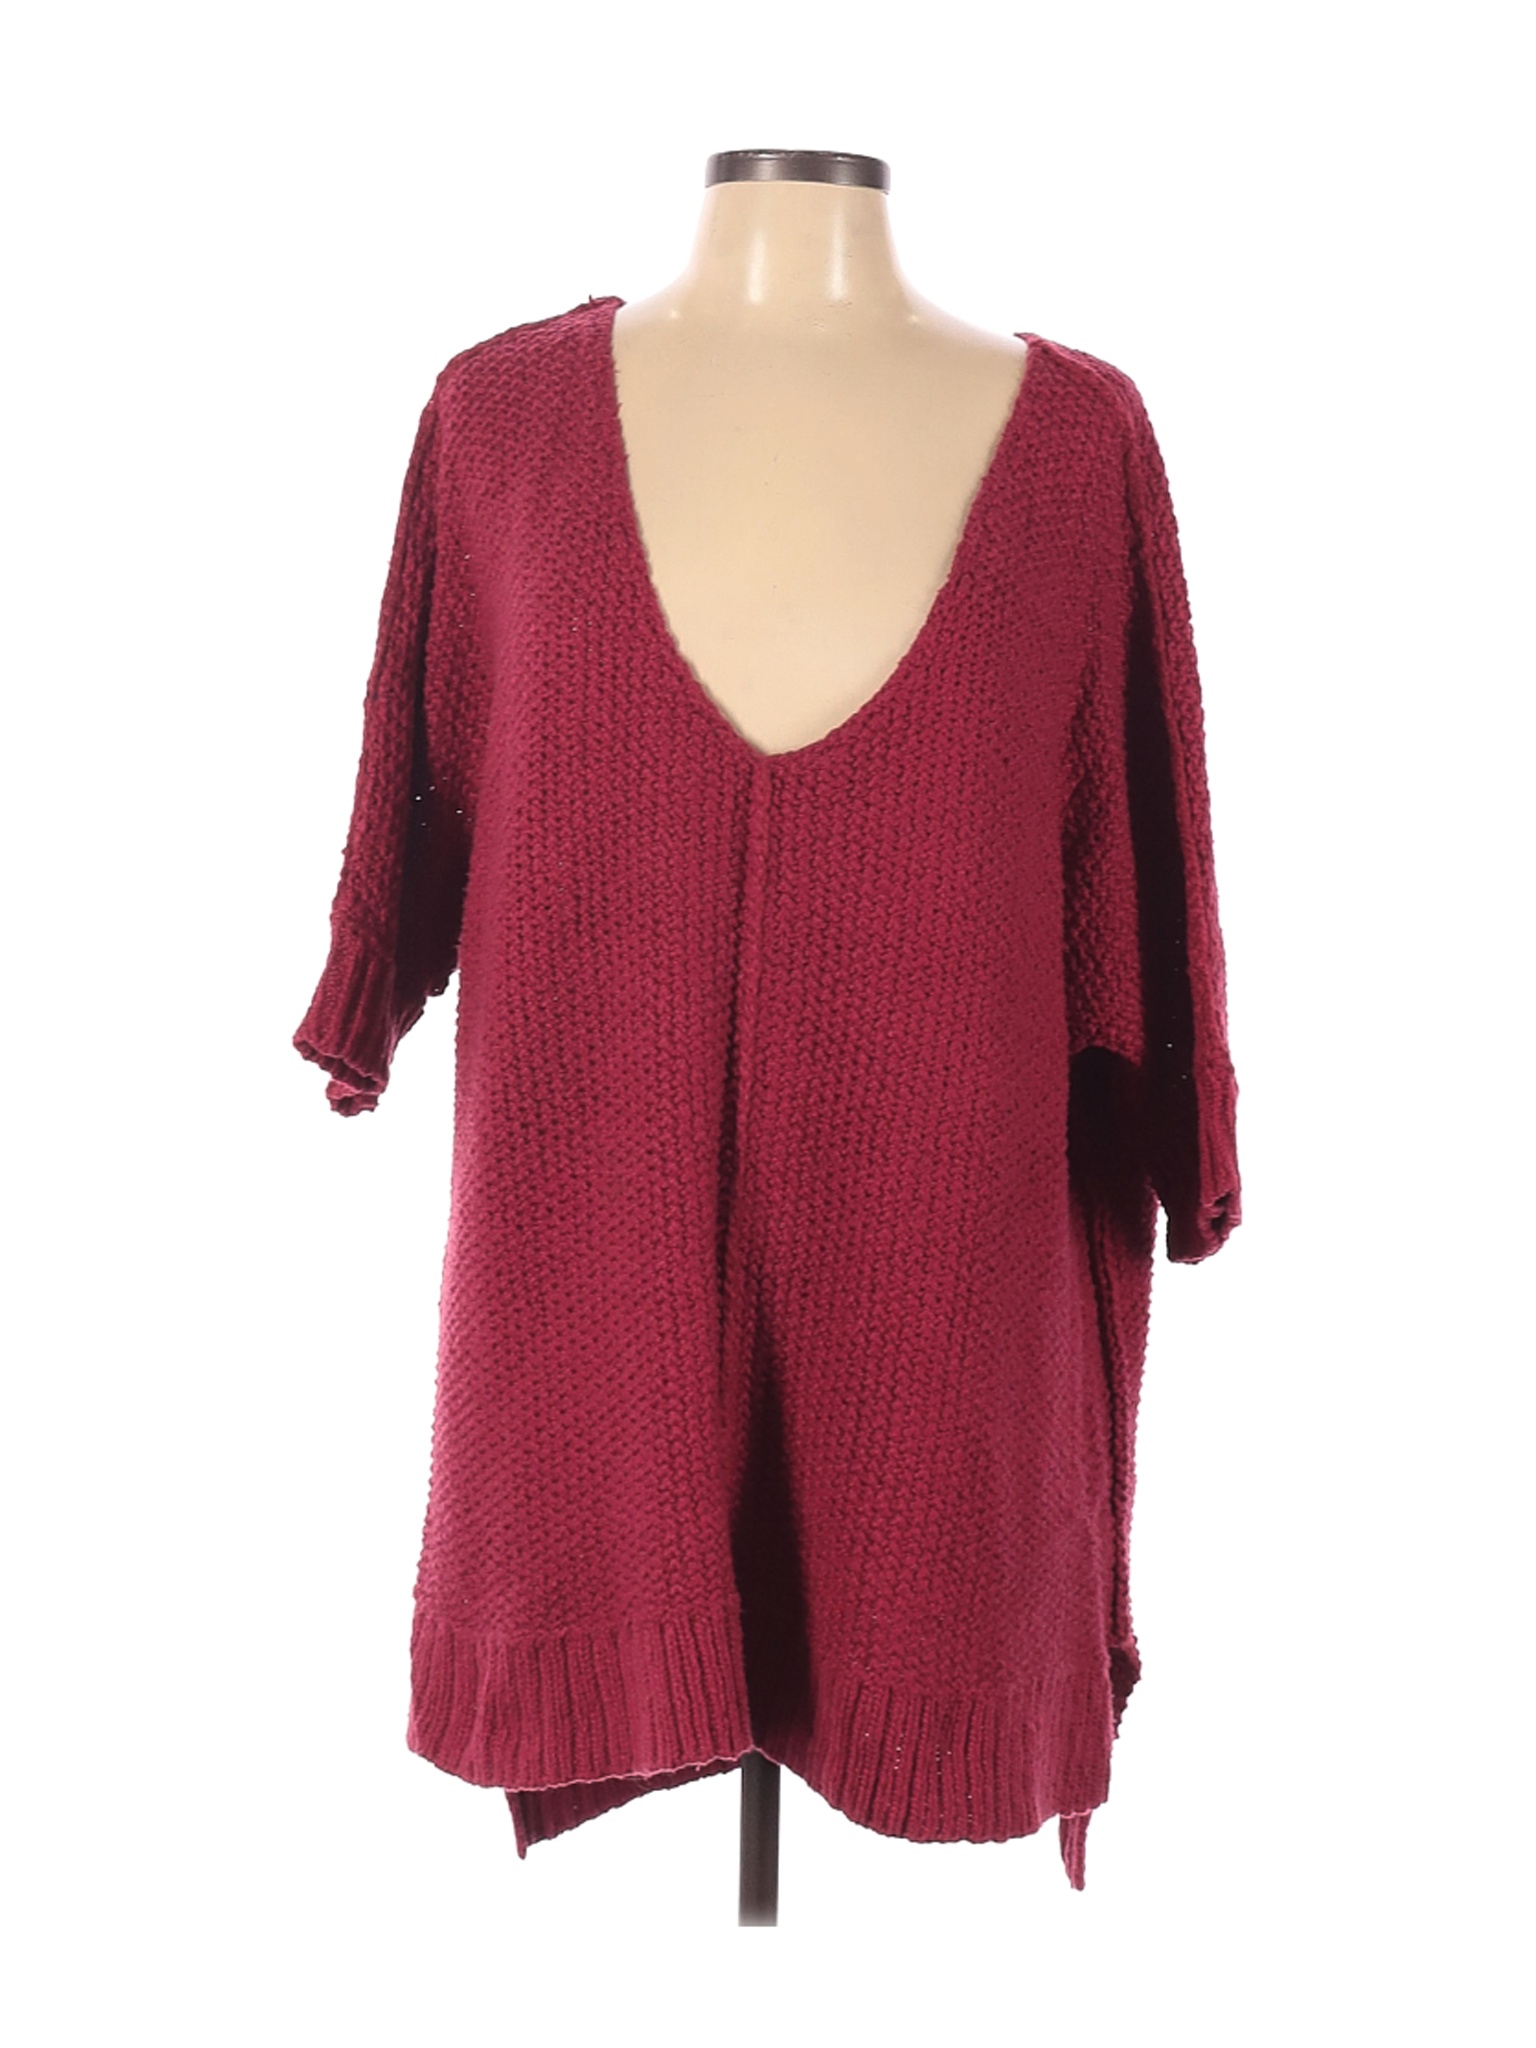 Free People Women Red Pullover Sweater M | eBay